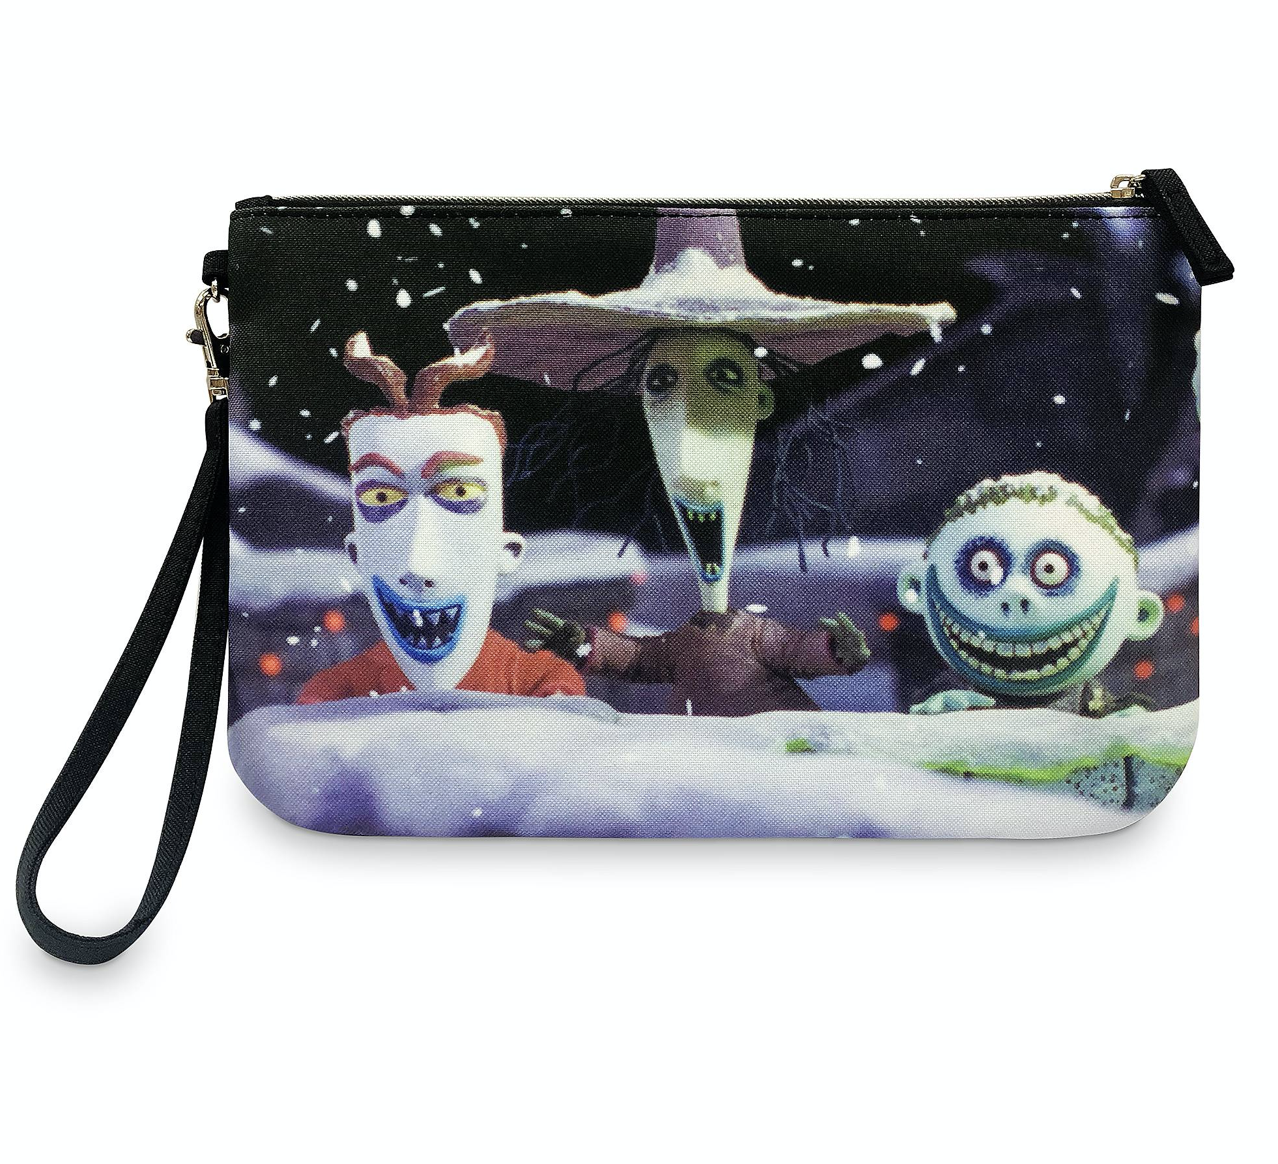 Disney The Nightmare Before Christmas Cosmetics Bag Oh My Disney New with Tags